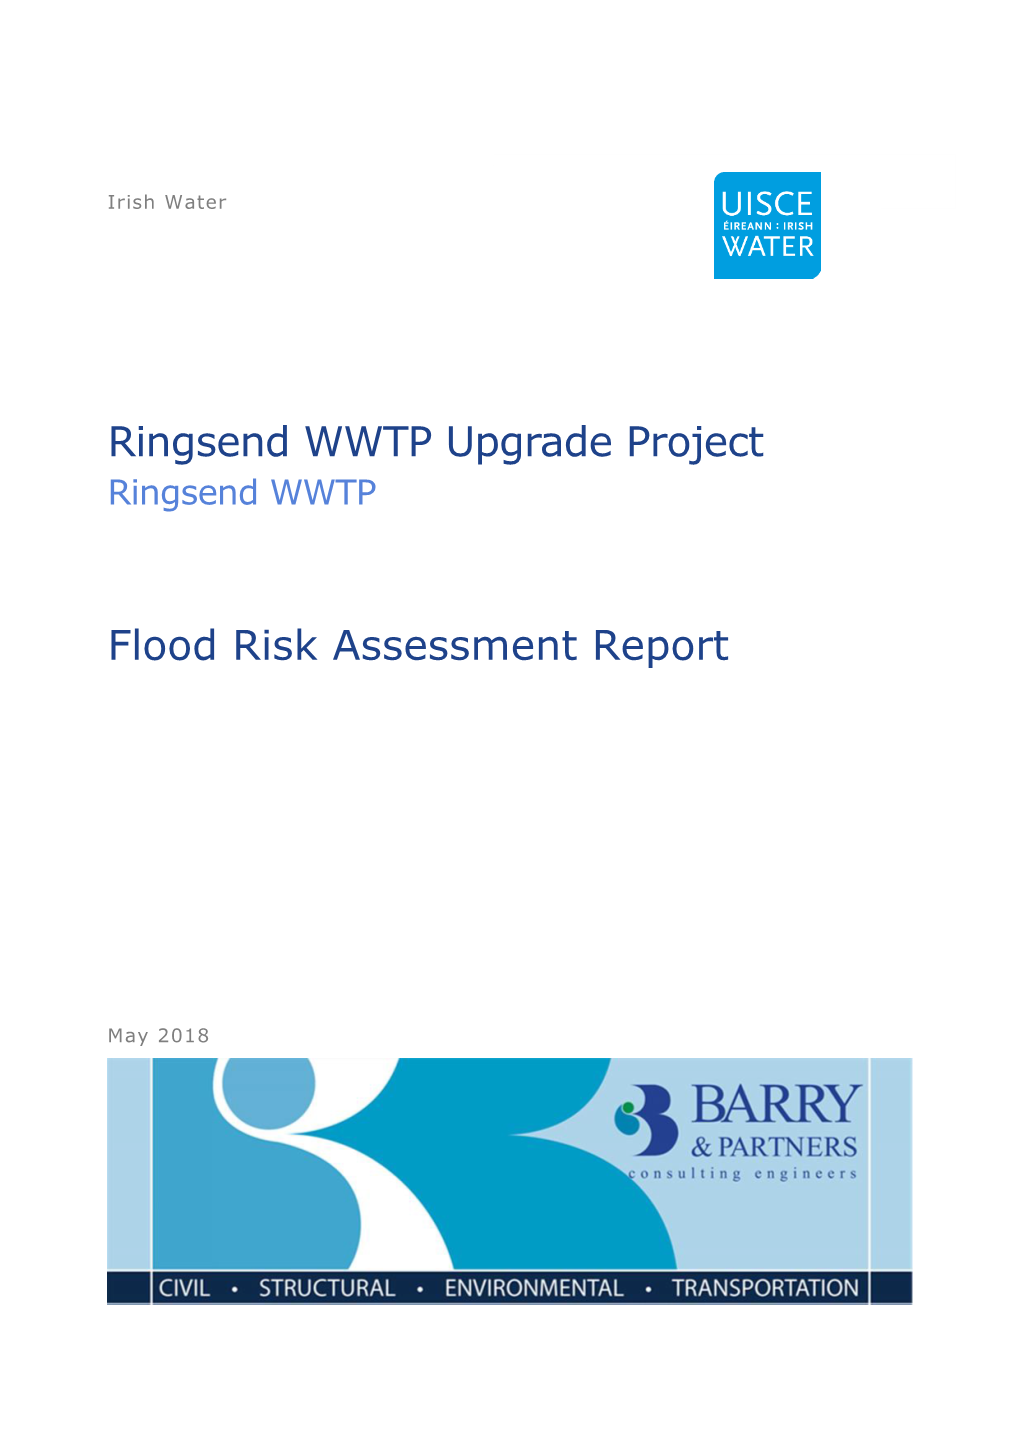 Ringsend WWTP Upgrade Project Flood Risk Assessment Report